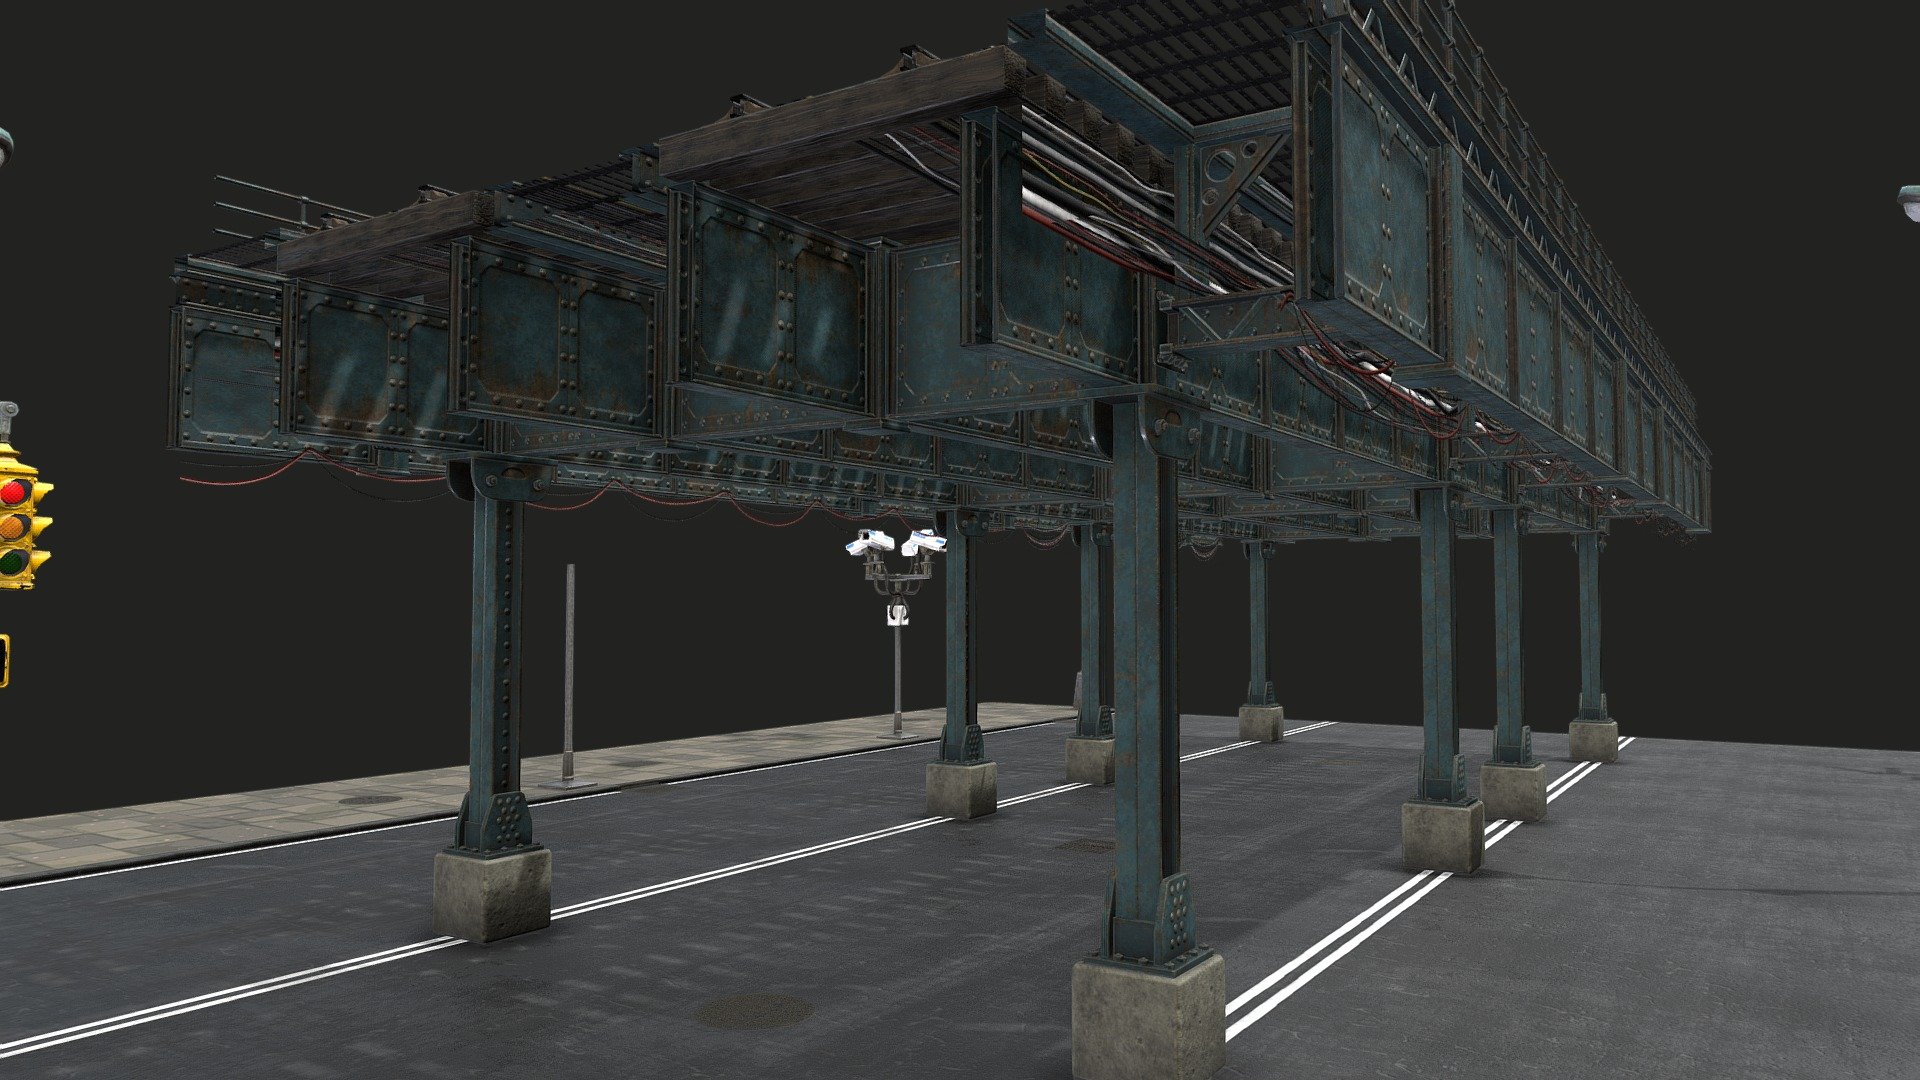 Modular Elevated Railway set I created for my Critter Junction project.

This is another iconic touchstone for the project, synonymous with the visual identity of NYC and specifically of 70's NY cinema like The French Connection and Taxi Driver. 

This set is versatile and can be configured in any number of ways (including non railway structures)

Created using 3DS Max and Substance Designer 3d model